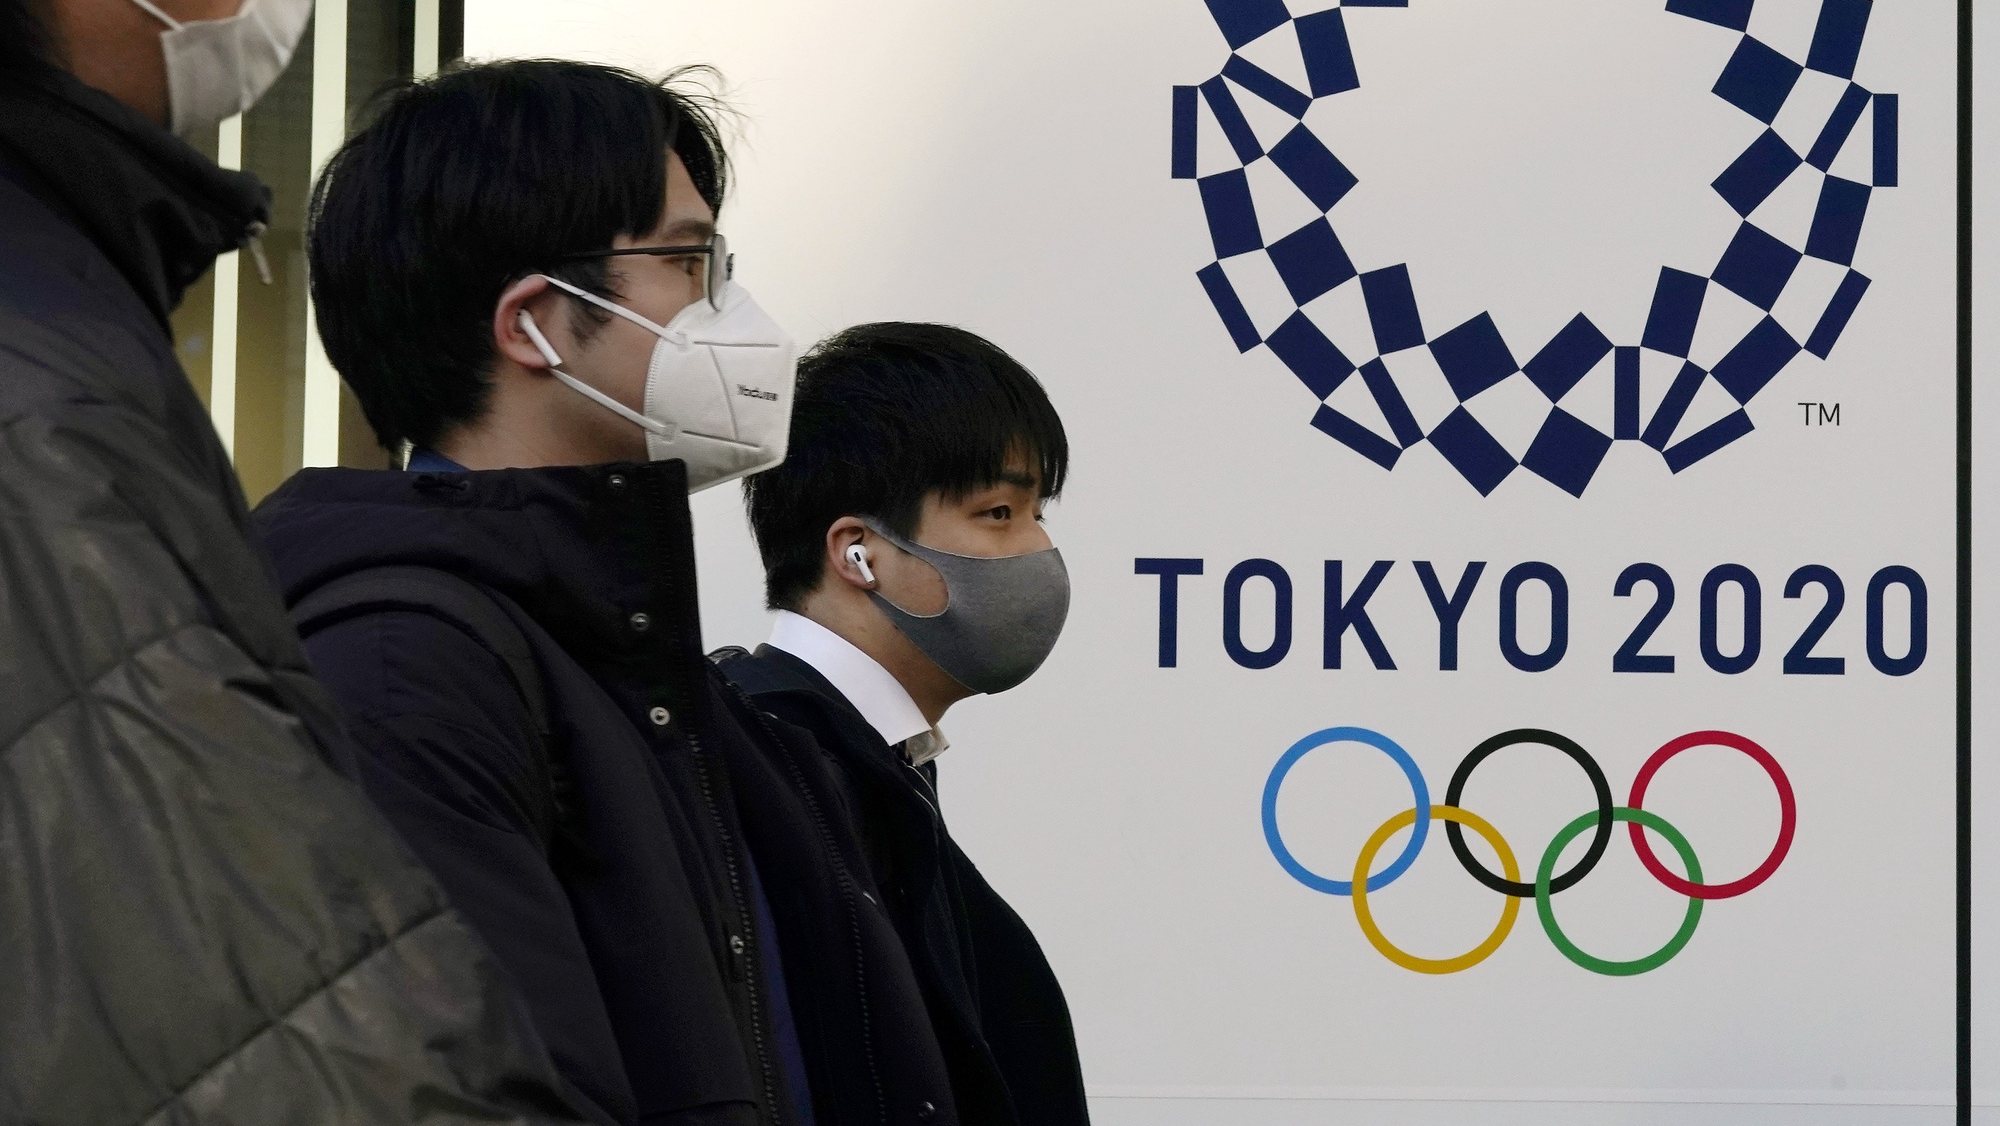 epaselect epa08956962 Pedestrians wearing protective masks walk past the emblem of Tokyo 2020 Olympic Games in Tokyo, Japan, 21 January 2021 (issued 22 January 2021). On 23 January 2021, Japan will mark half-year before the opening of the Tokyo 2020 Olympic Games, which were postponed due to the coronavirus pandemic. The Tokyo Olympics are rescheduled to open on 23 July but uncertainty is rising as Tokyo and its surrounding prefectures entered a new state of emergency following a jump of infection cases. Public support is fading and more than 80 per cent of the population is in favour of an other postponement or even a cancellation of the Tokyo Games. Despite the increasing pressure on the organisers, International Olympic Committee President Thomas Bach, Japanese Prime Minister Yoshihide Suga, Tokyo Metropolitan Government and Tokyo 2020 Organising Committee reiterated that they are preparing ‘safe and secure Games’.  EPA/KIMIMASA MAYAMA  ATTENTION: This Image is part of a PHOTO SET